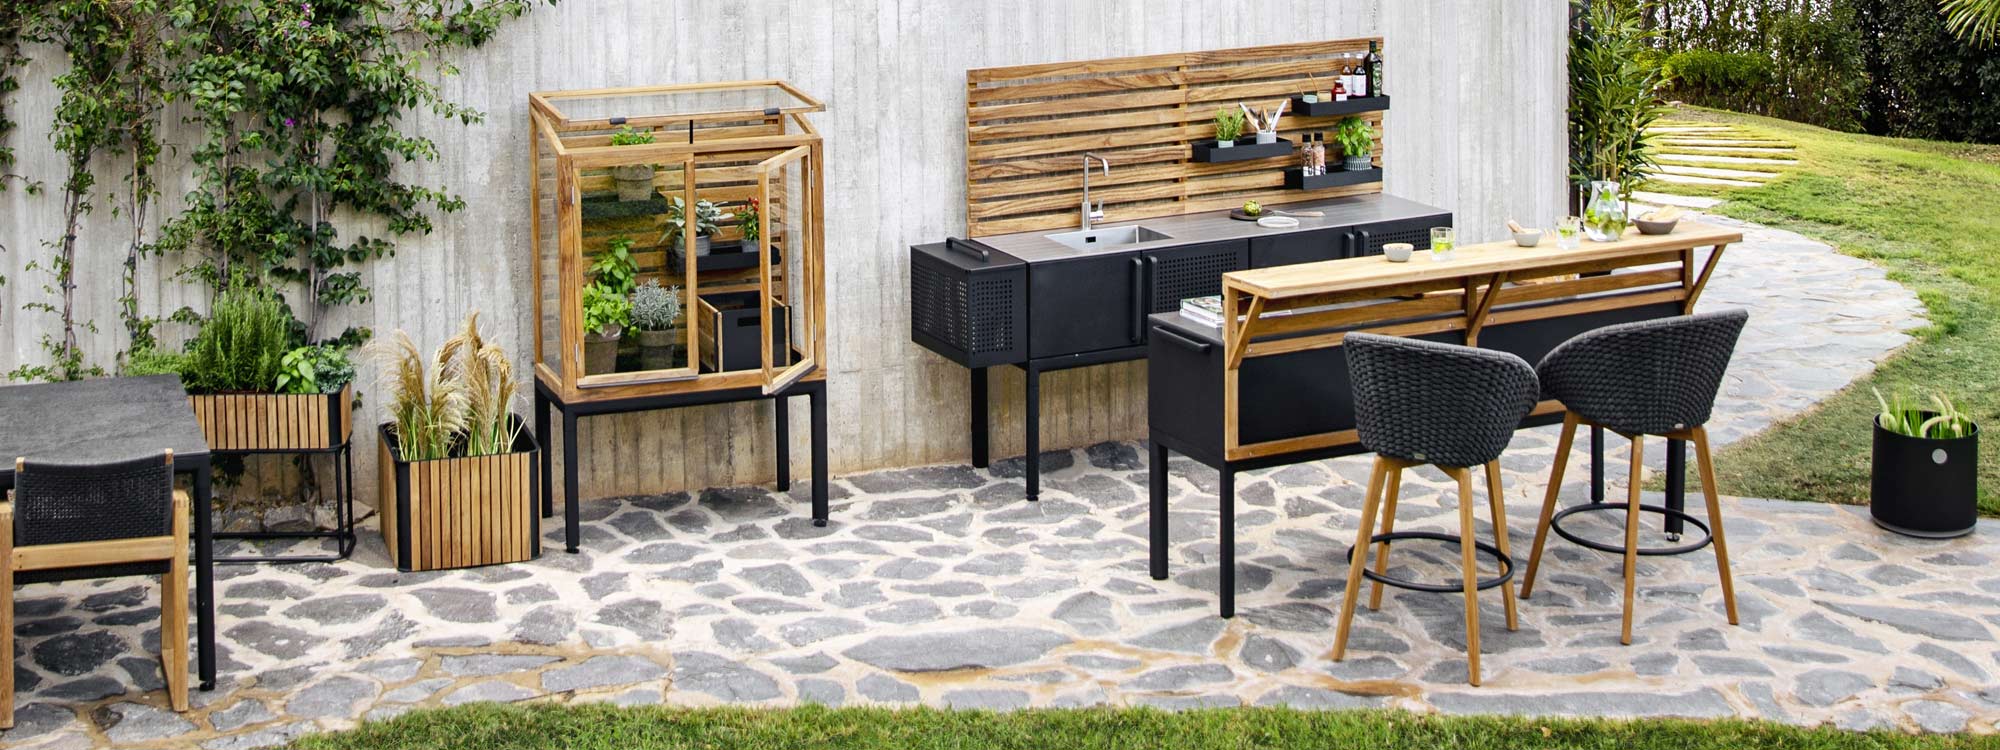 Drop mini greenhouse and outdoor kitchen counter with trellis